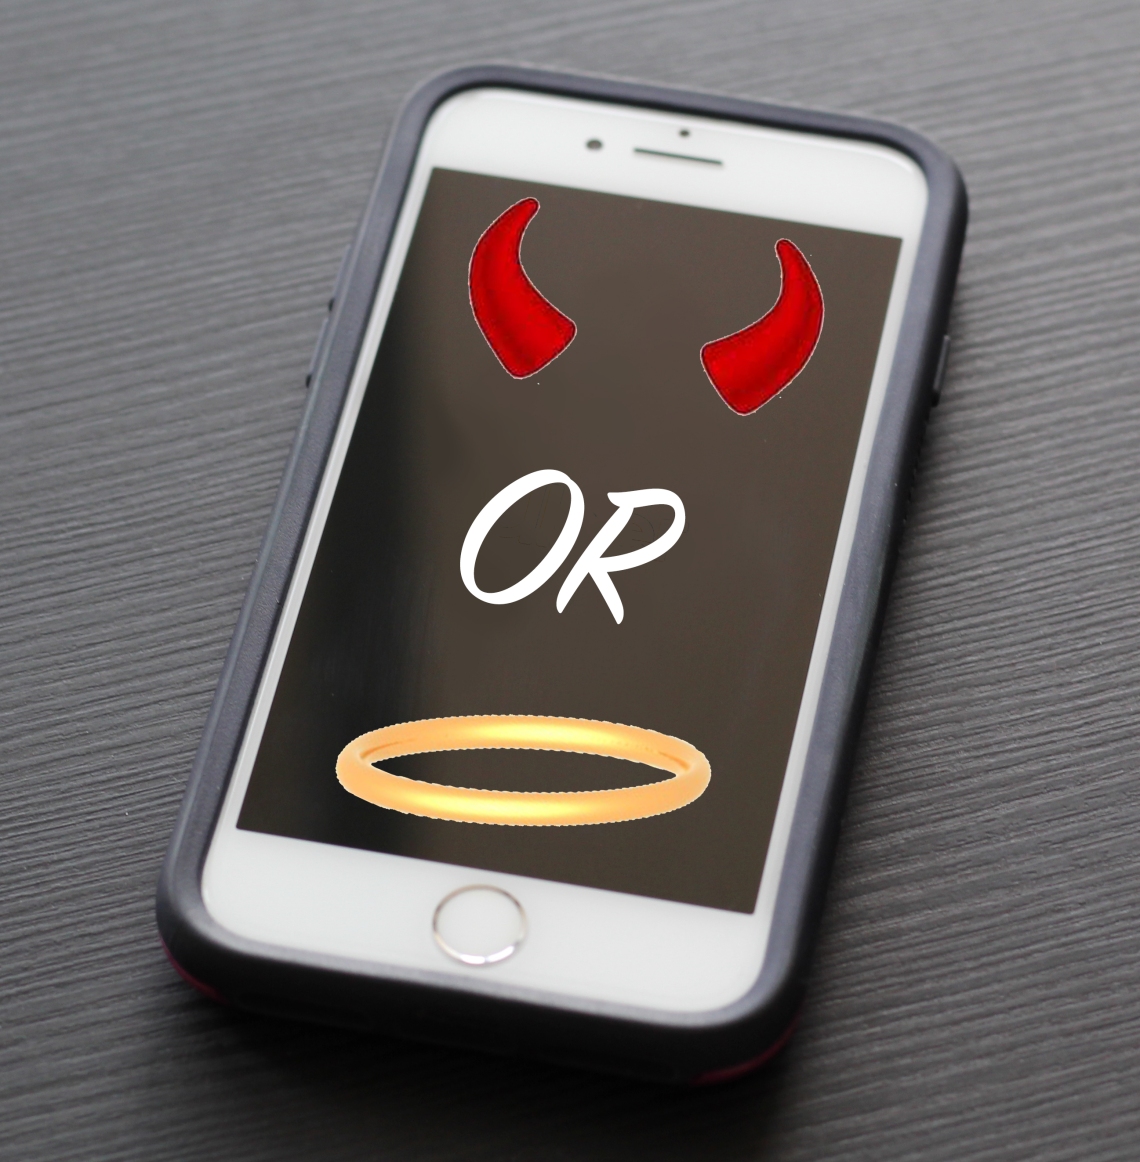 smart phone with image of devil horns "OR" and angel halo